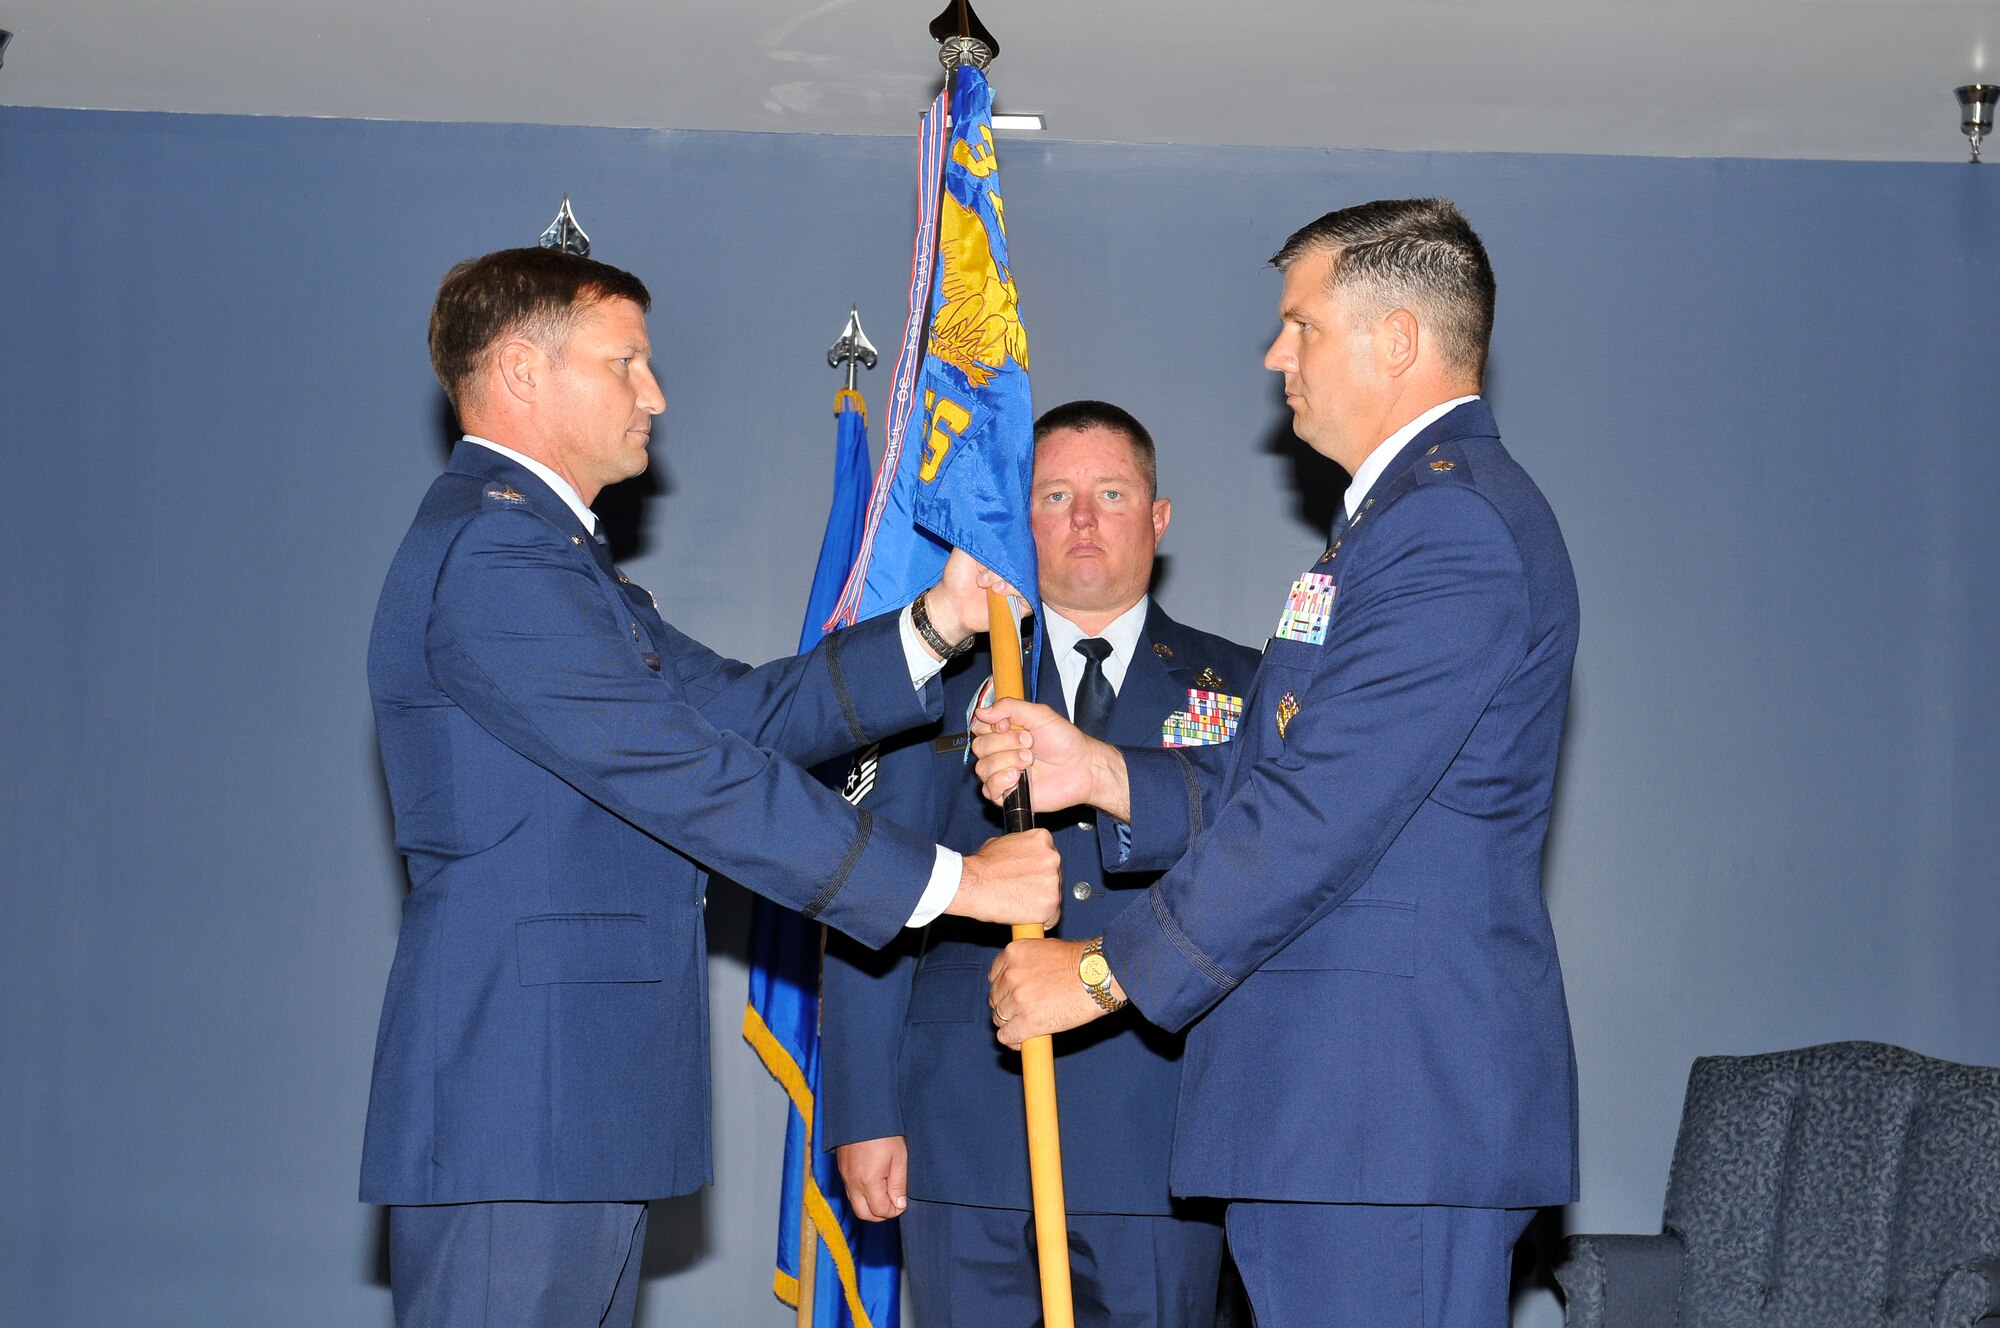 Lieutenant Col. Douglas Gilpin accepts the 325th Civil Engineer Squadron guidon from Col. Michael Fleck, 325th Mission Support Group commander, during a Change of Command ceremony July 22 at Tyndall. Colonel Gilpin replaces Lt. Col. Keith Welch as the new 325th CE commander. (U.S. Air Force photo/Lisa Norman)